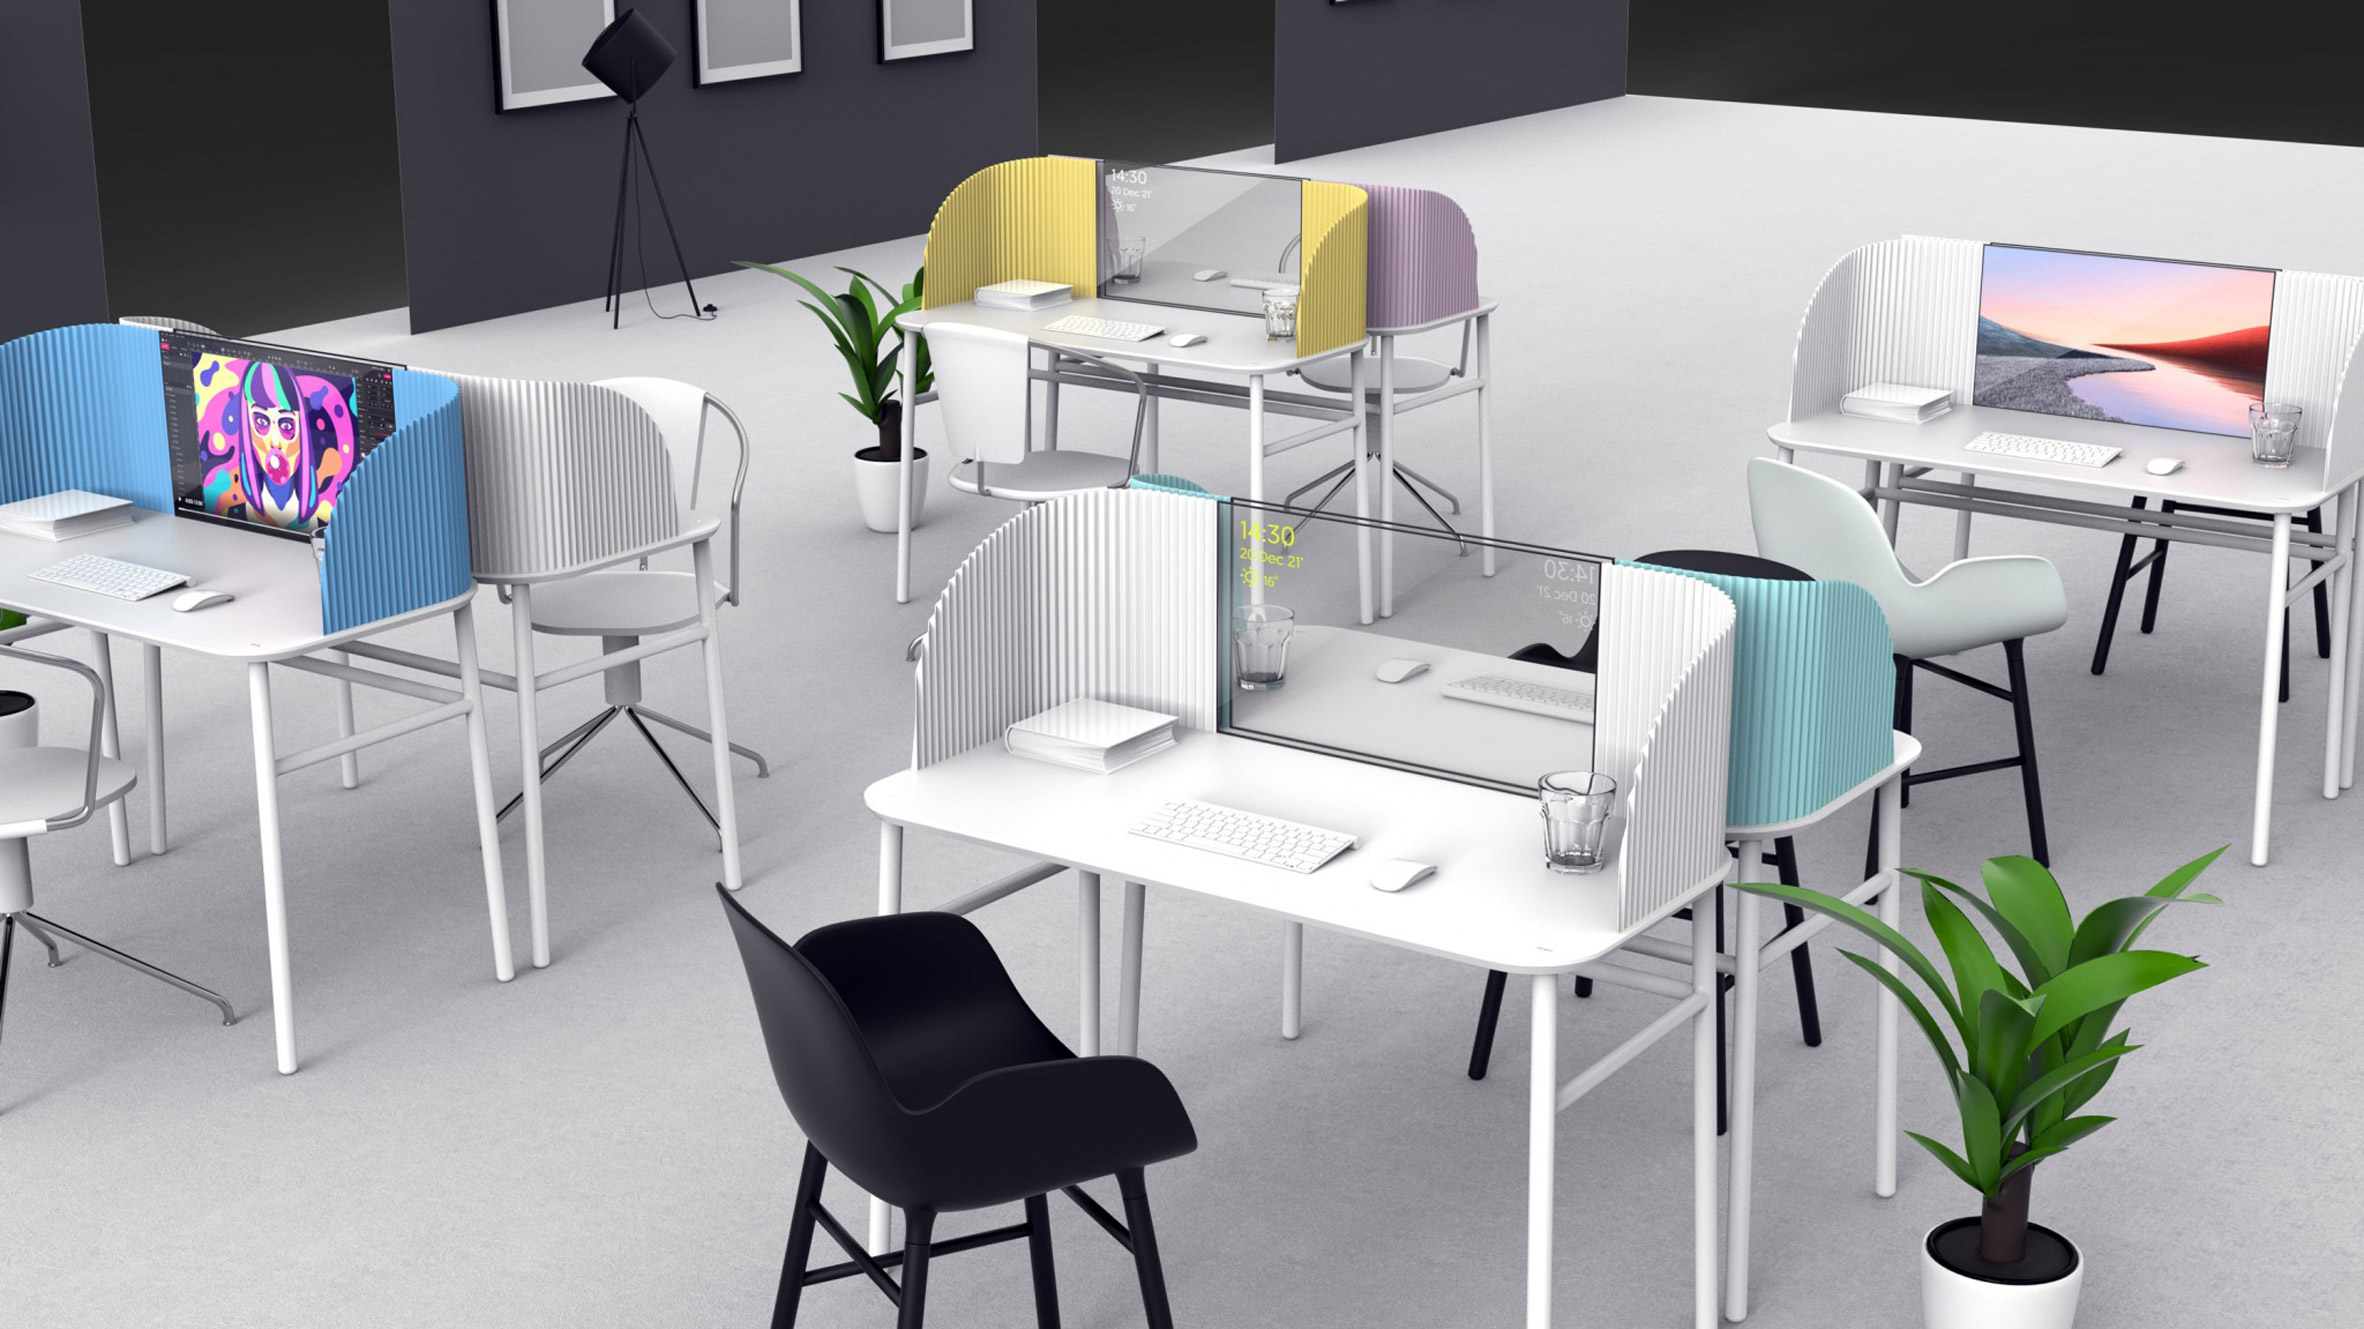 Multiple Caelum desks in an office setting with different coloured panels